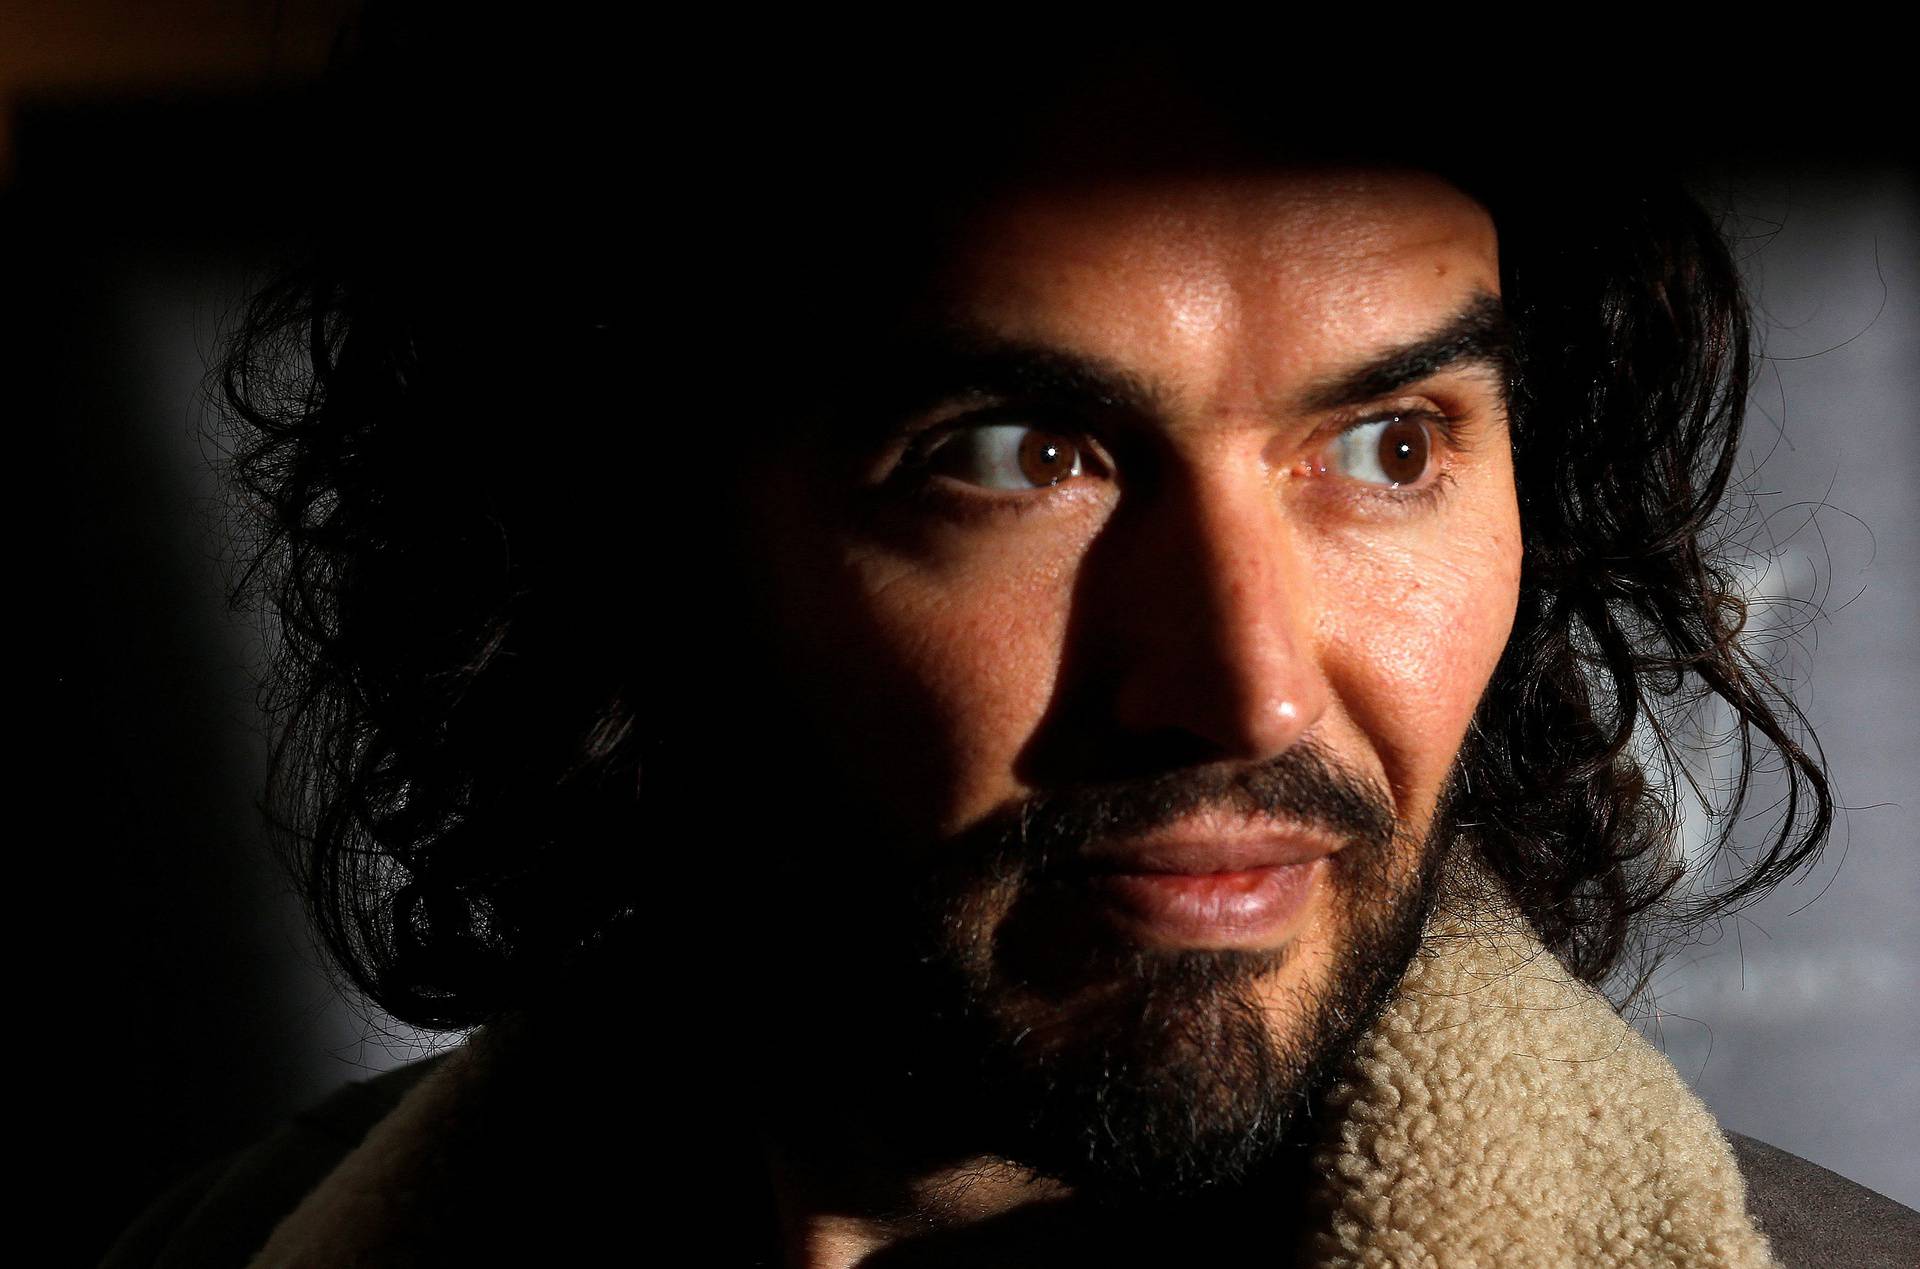 FILE PHOTO: Russell Brand poses for photographers before signing copies of new book entitled "Revolution" in central London